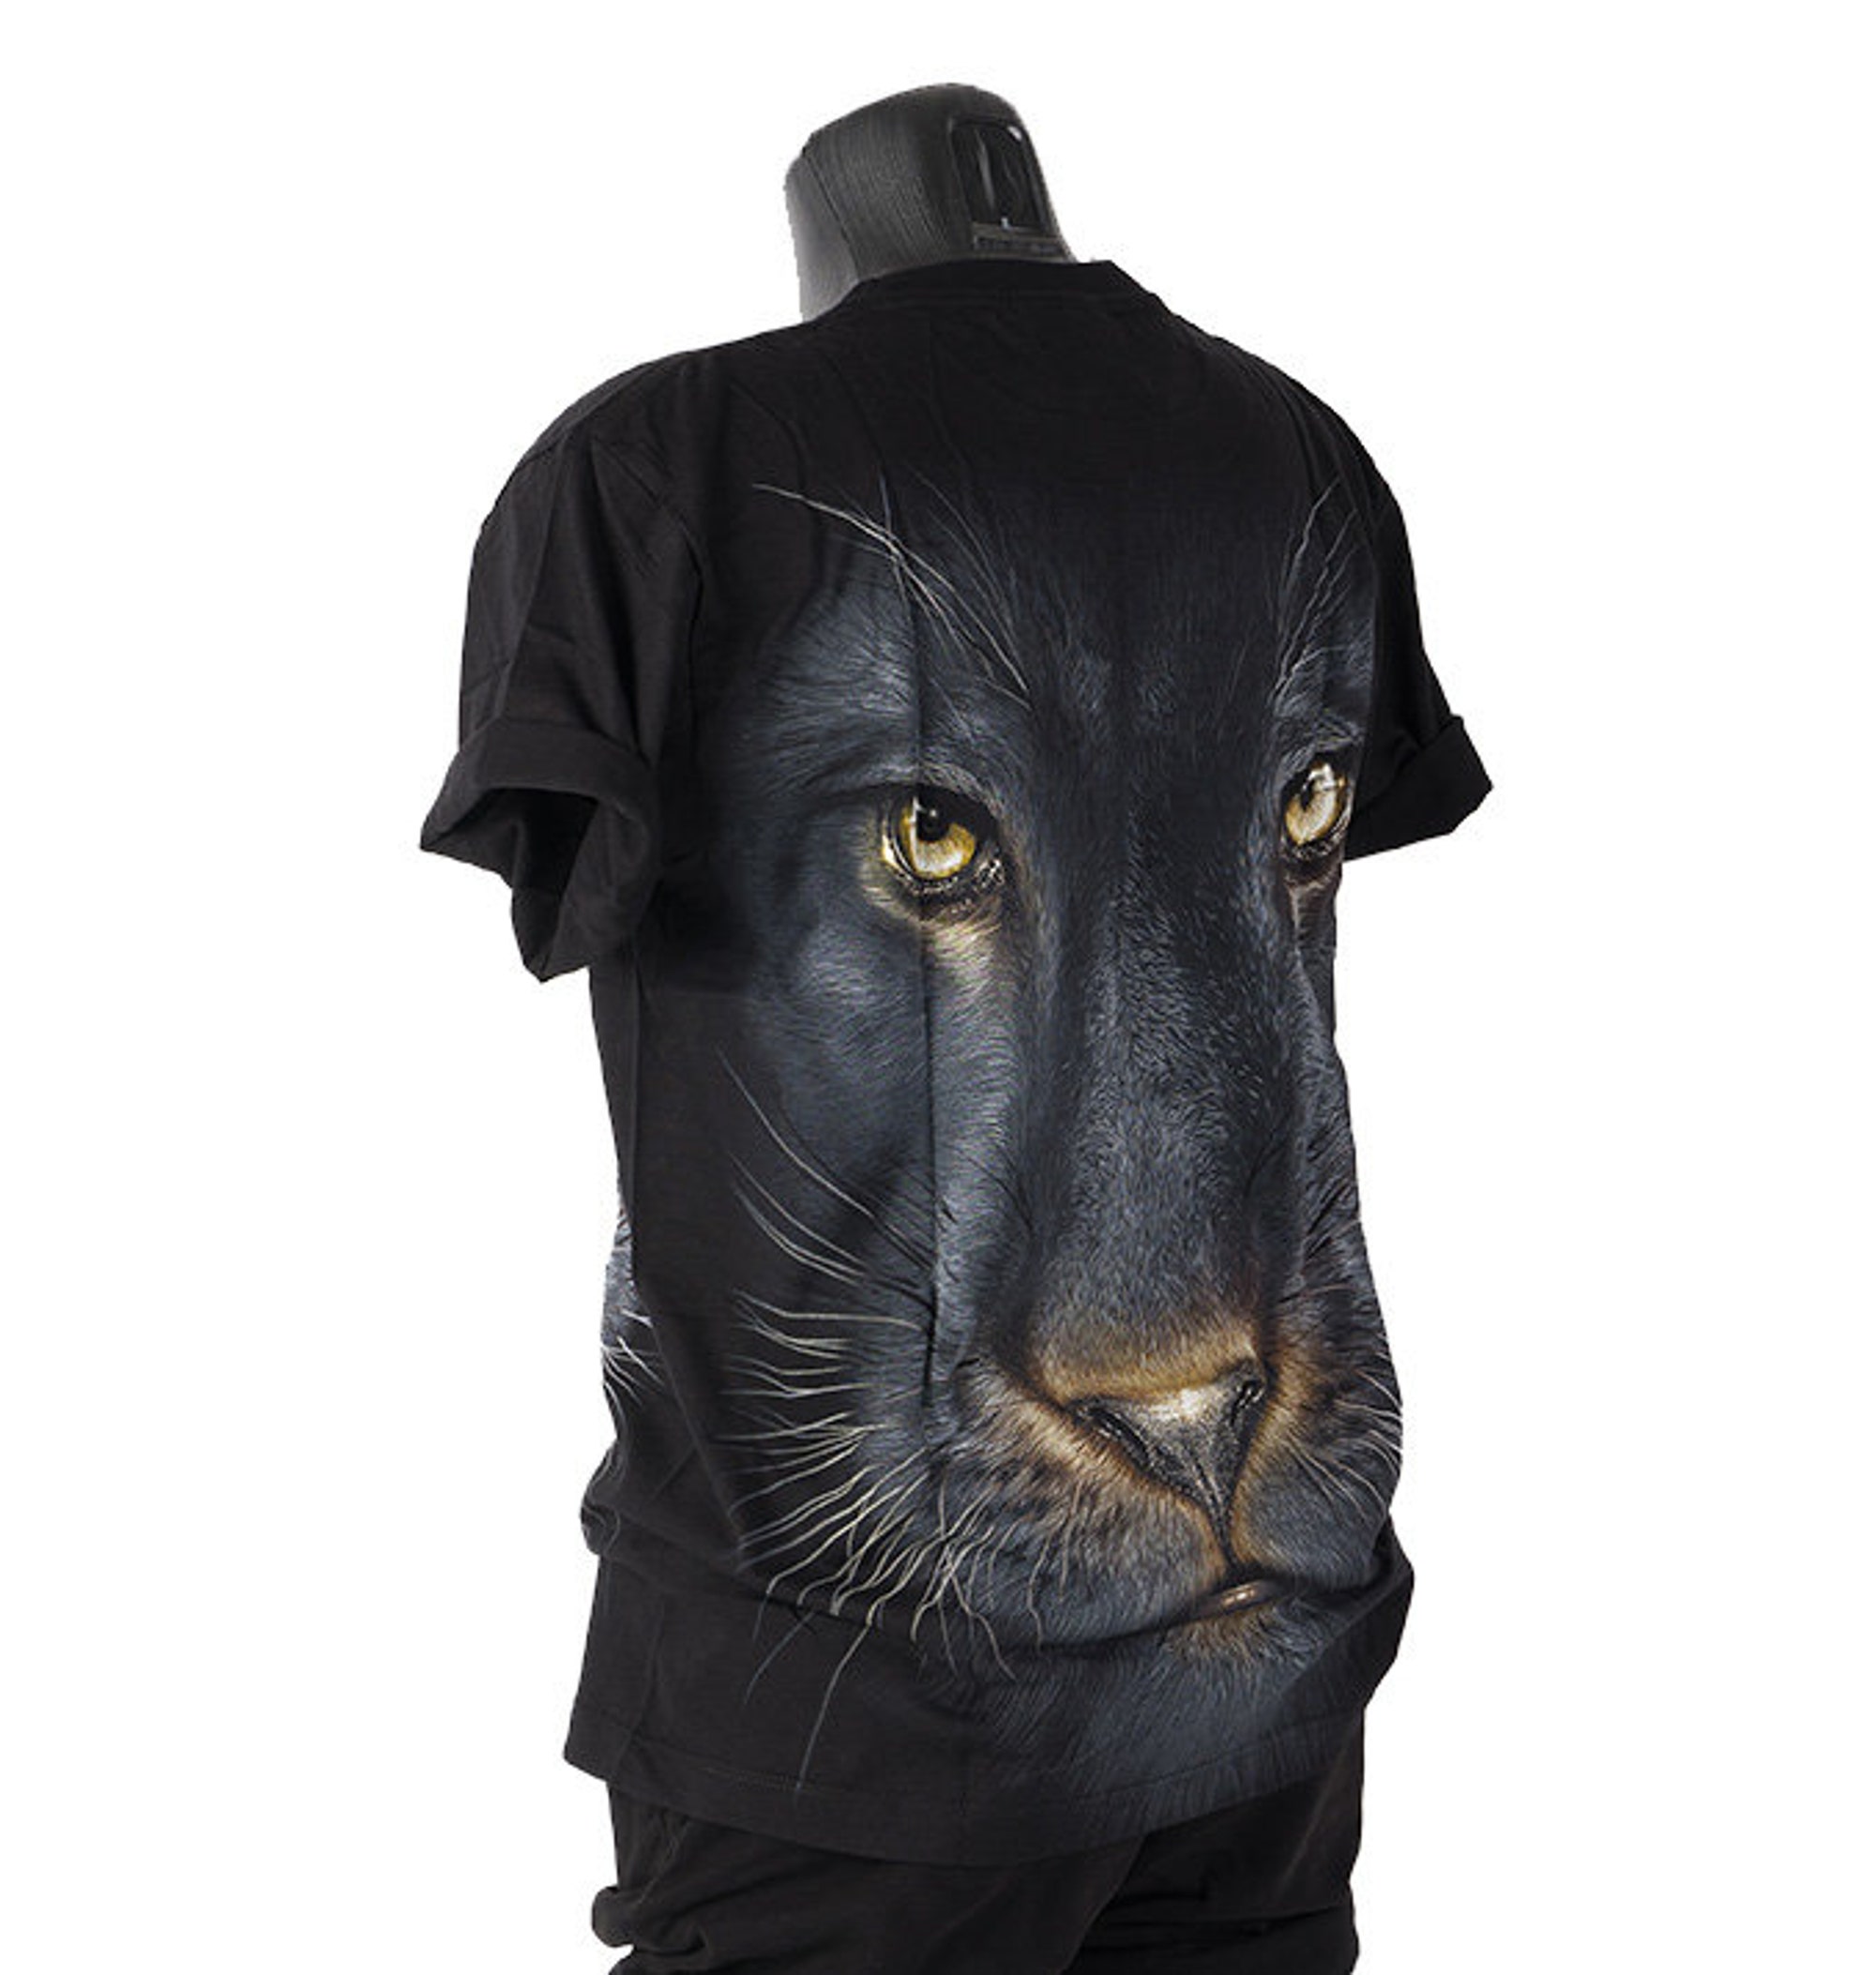 Black Puma's Head Glow in the Dark Front and Back Print Unisex